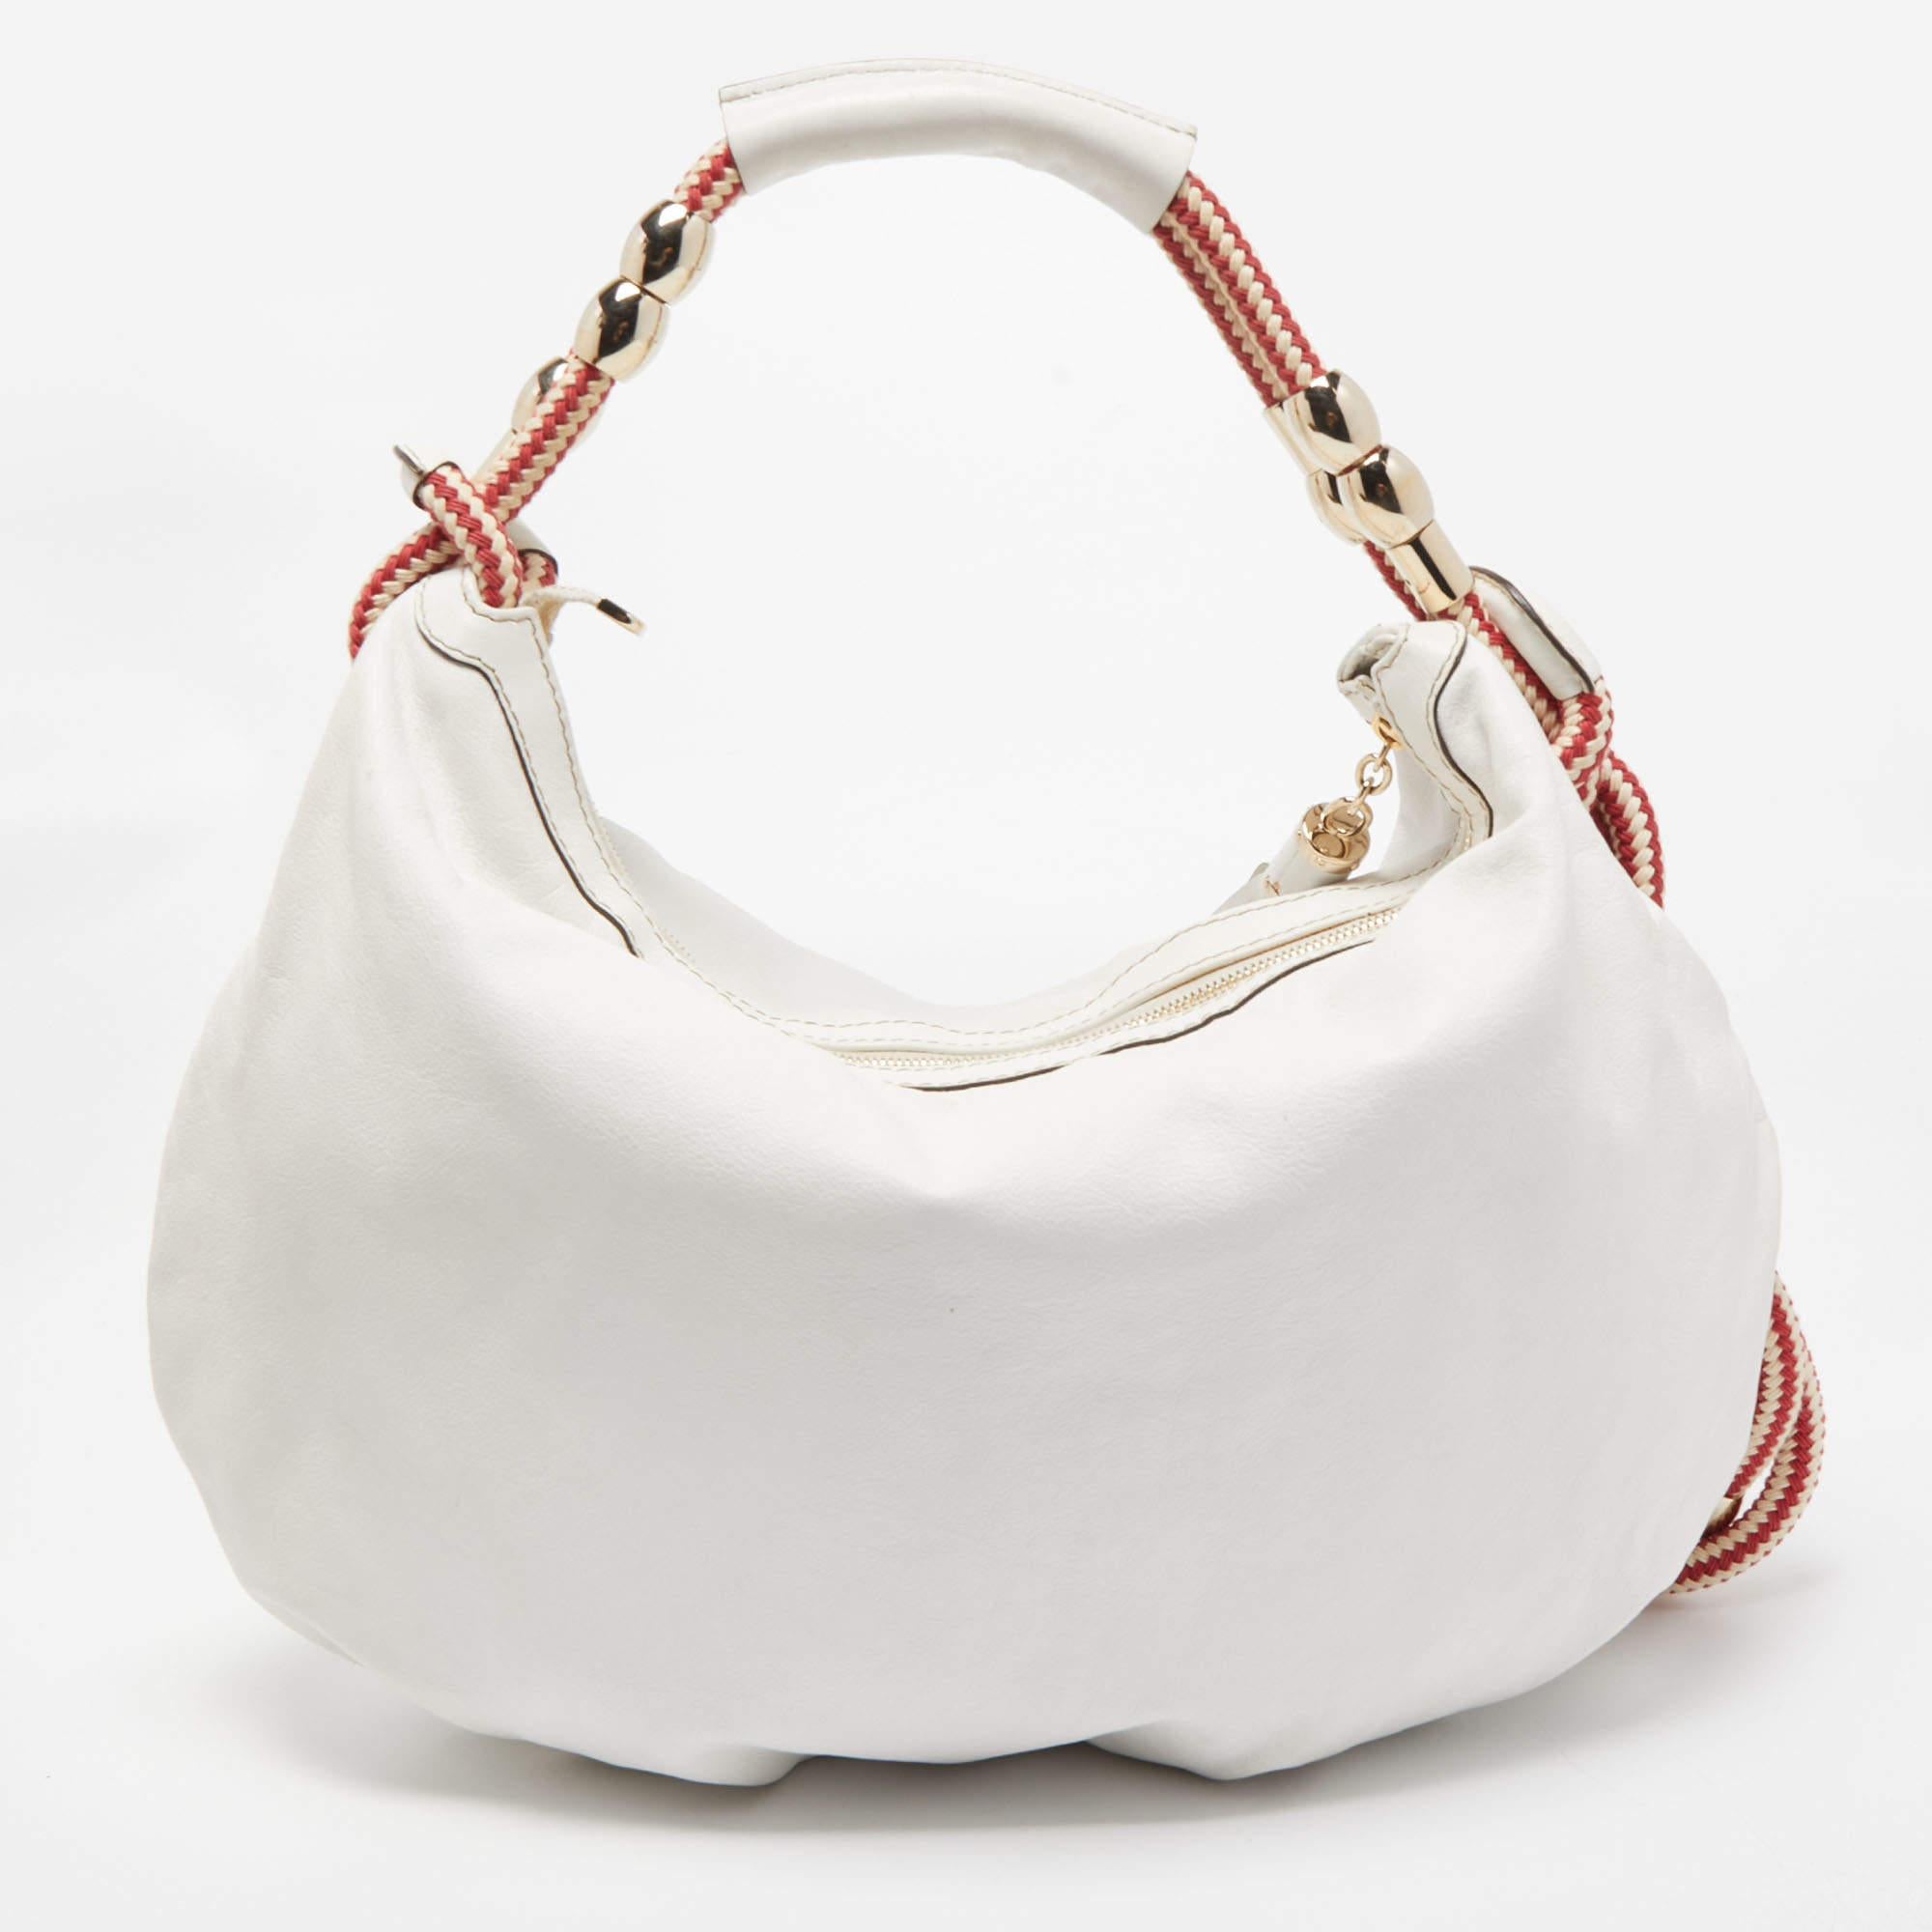 This Acapulco hobo from Gucci has been designed to be a worthy style companion! Crafted from leather, the bag features a spacious interior to carry your essentials in.

Includes: Original Dustbag
